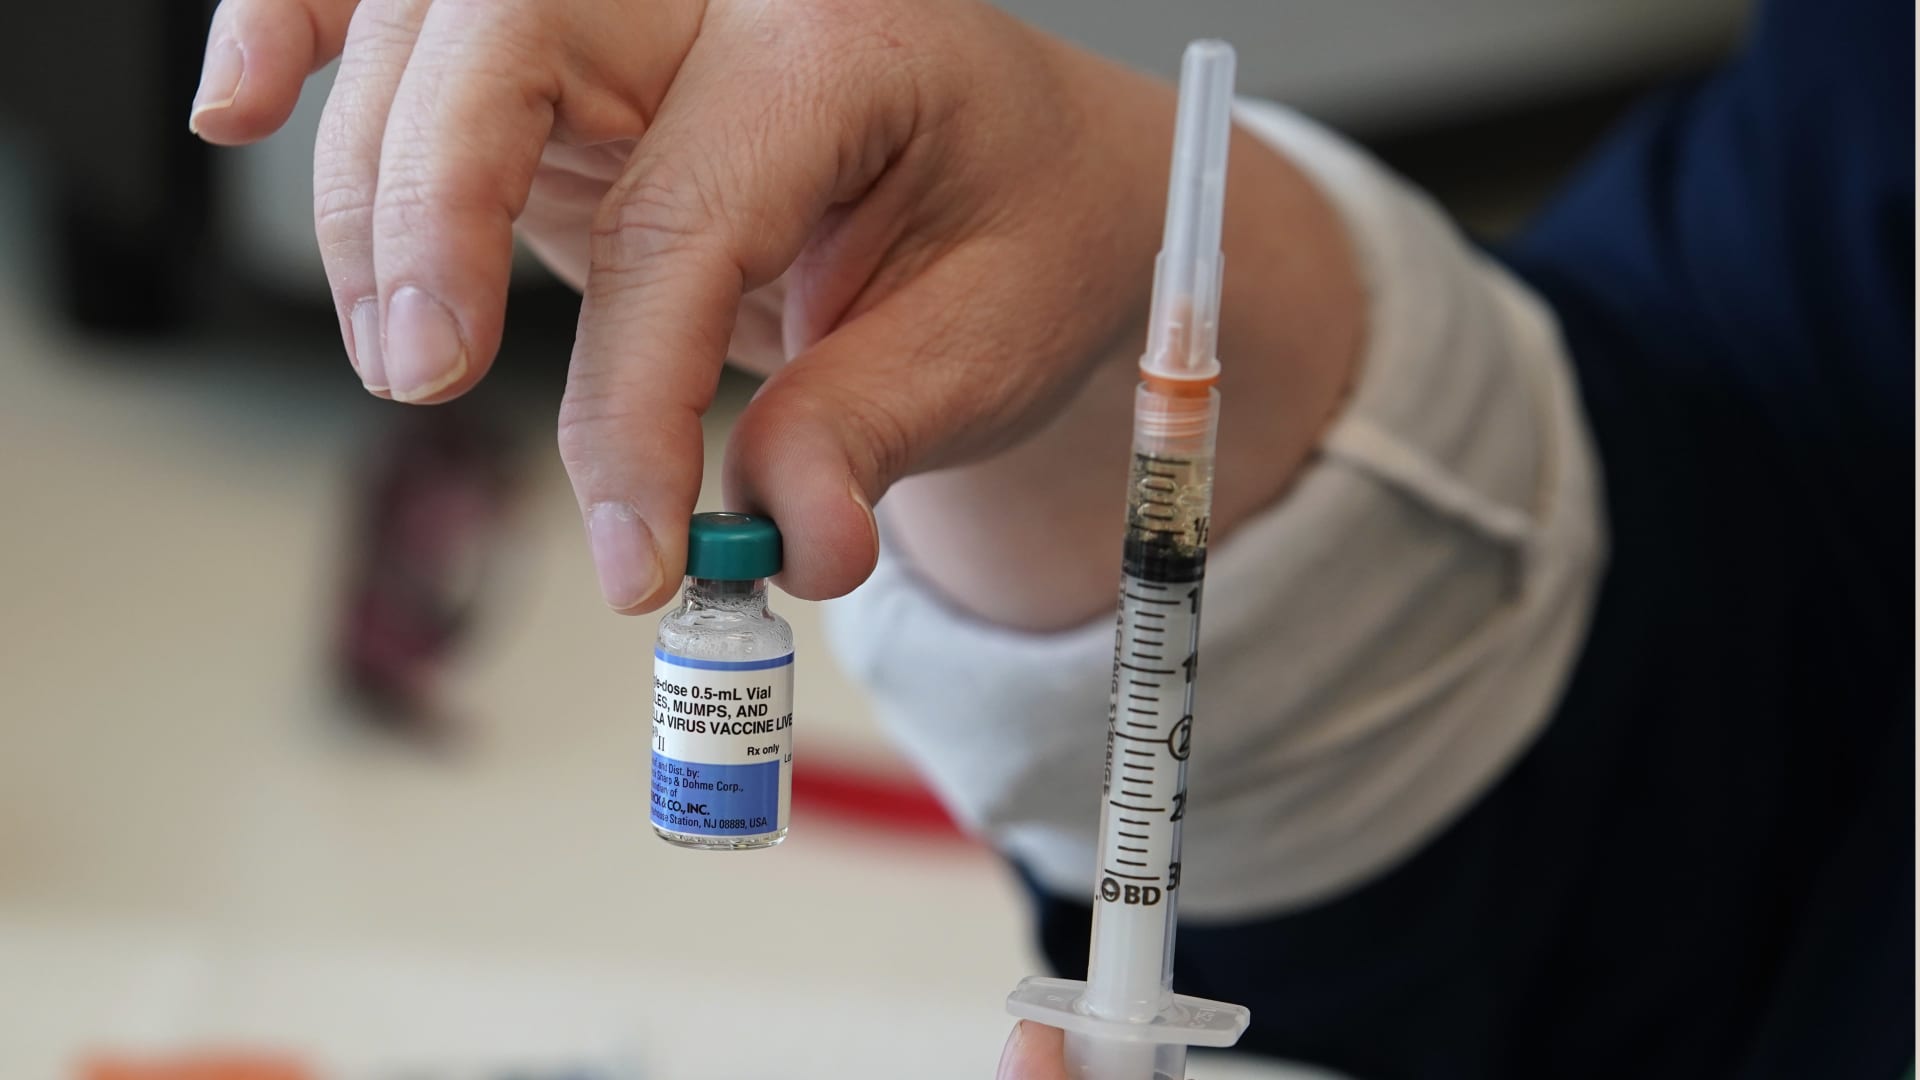 Measles poses rising menace to children as vaccinations decline globally, CDC and WHO warn